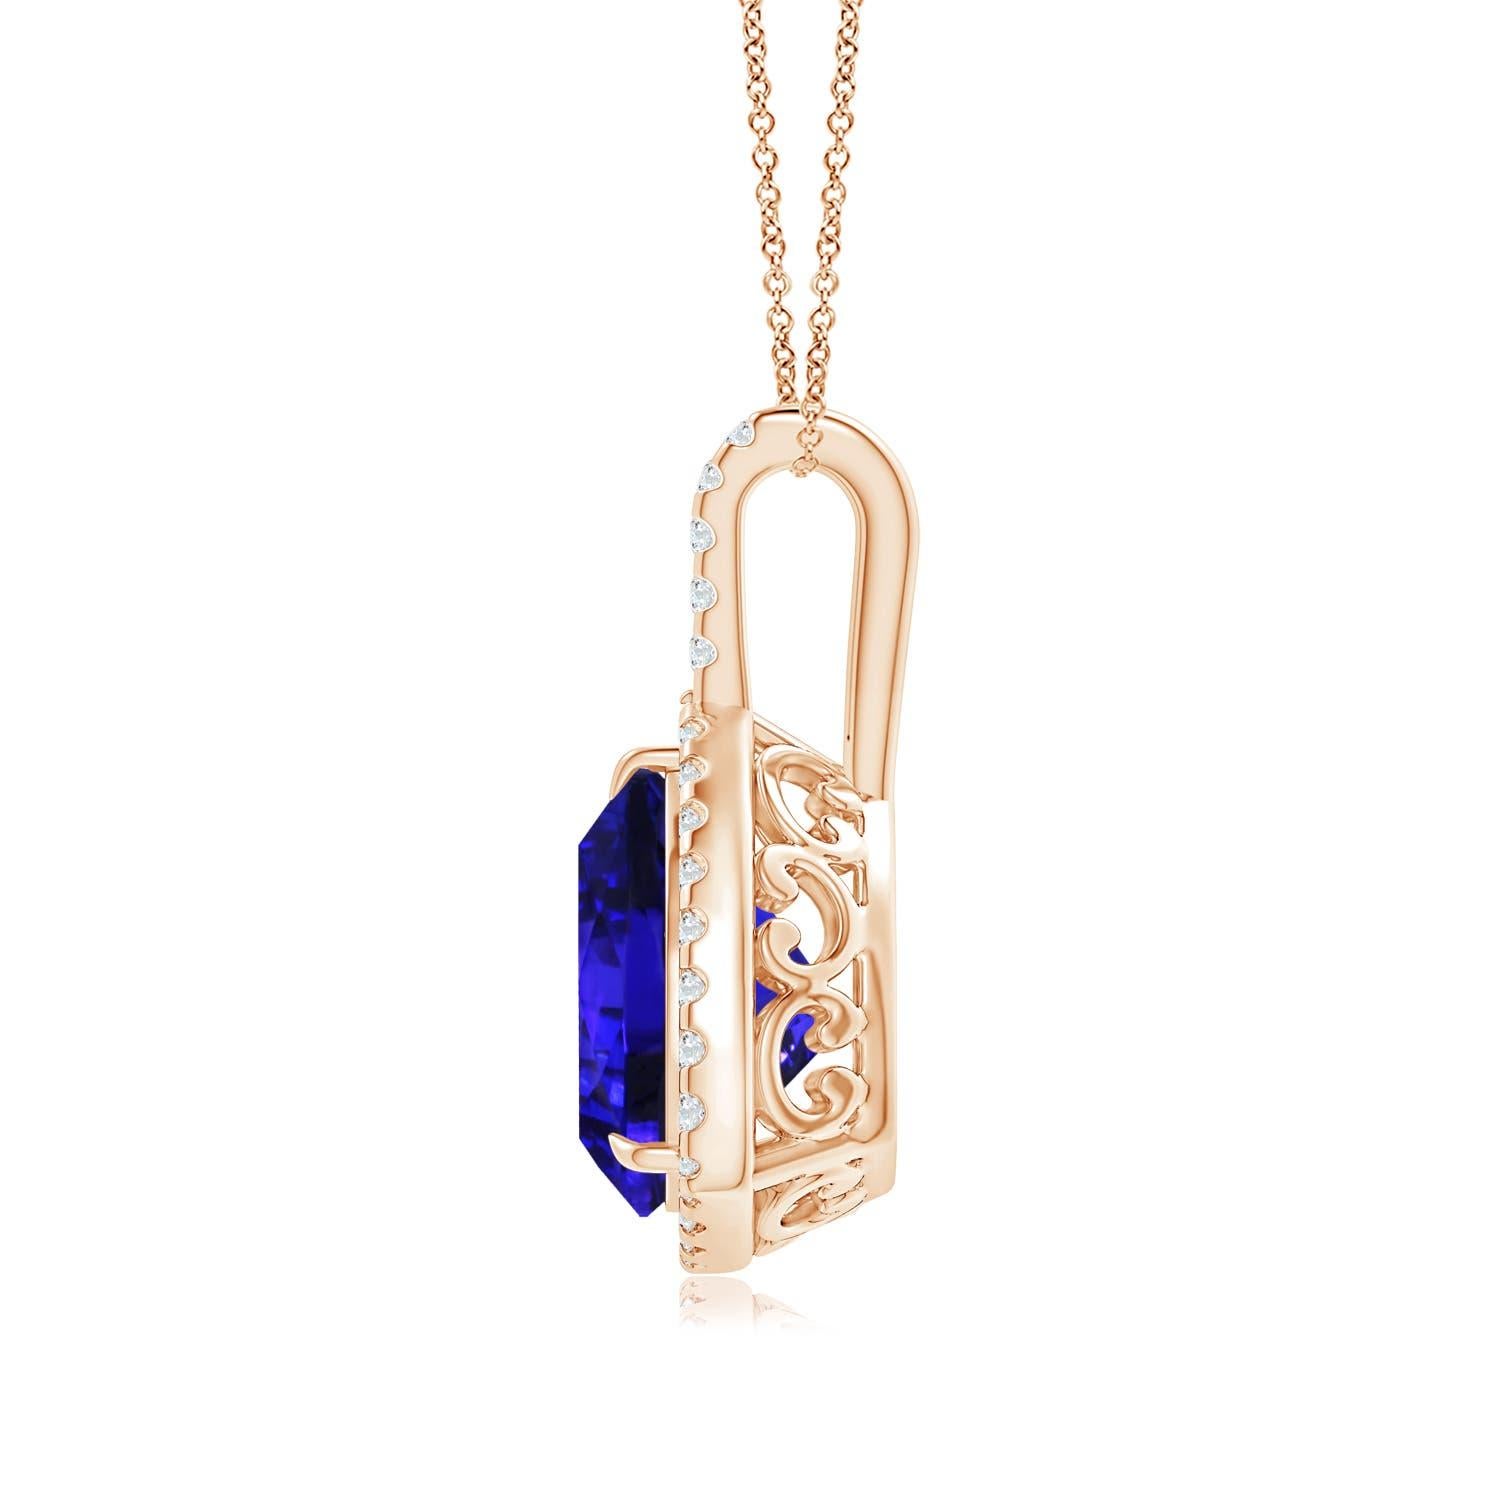 Designed with a diamond-studded bale and elegant scrollwork on the metal, this trillion tanzanite halo pendant in 14k rose gold looks simple yet enigmatic. The brilliant u prong diamonds enhance the bluish-purple hue of the GIA certified